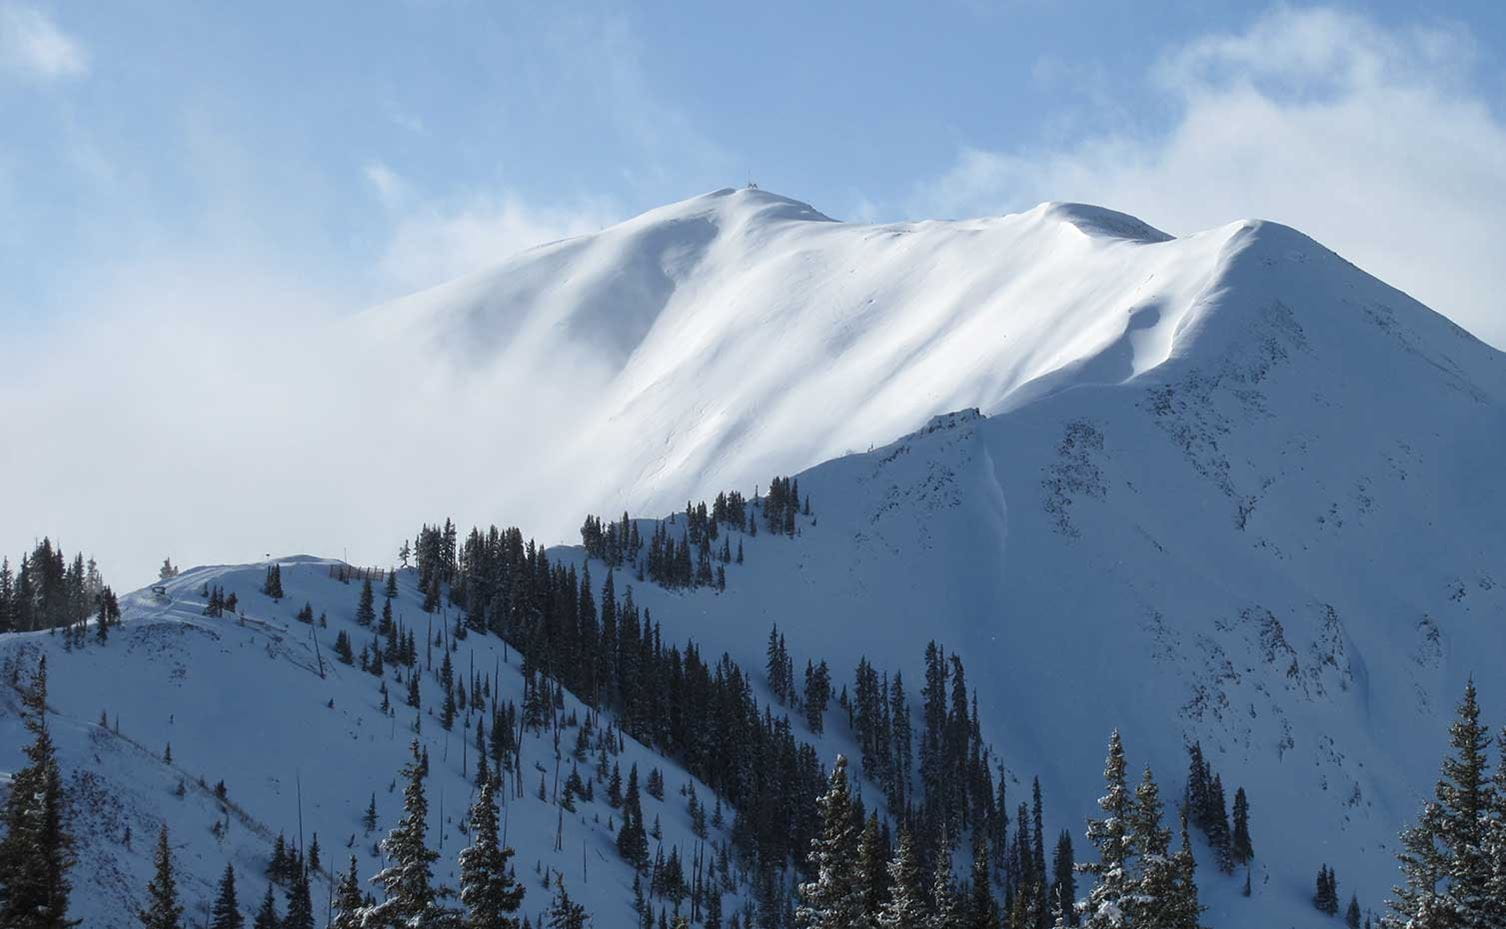 View of Highland Peak and Highland Bowl from atop Aspen Highlands